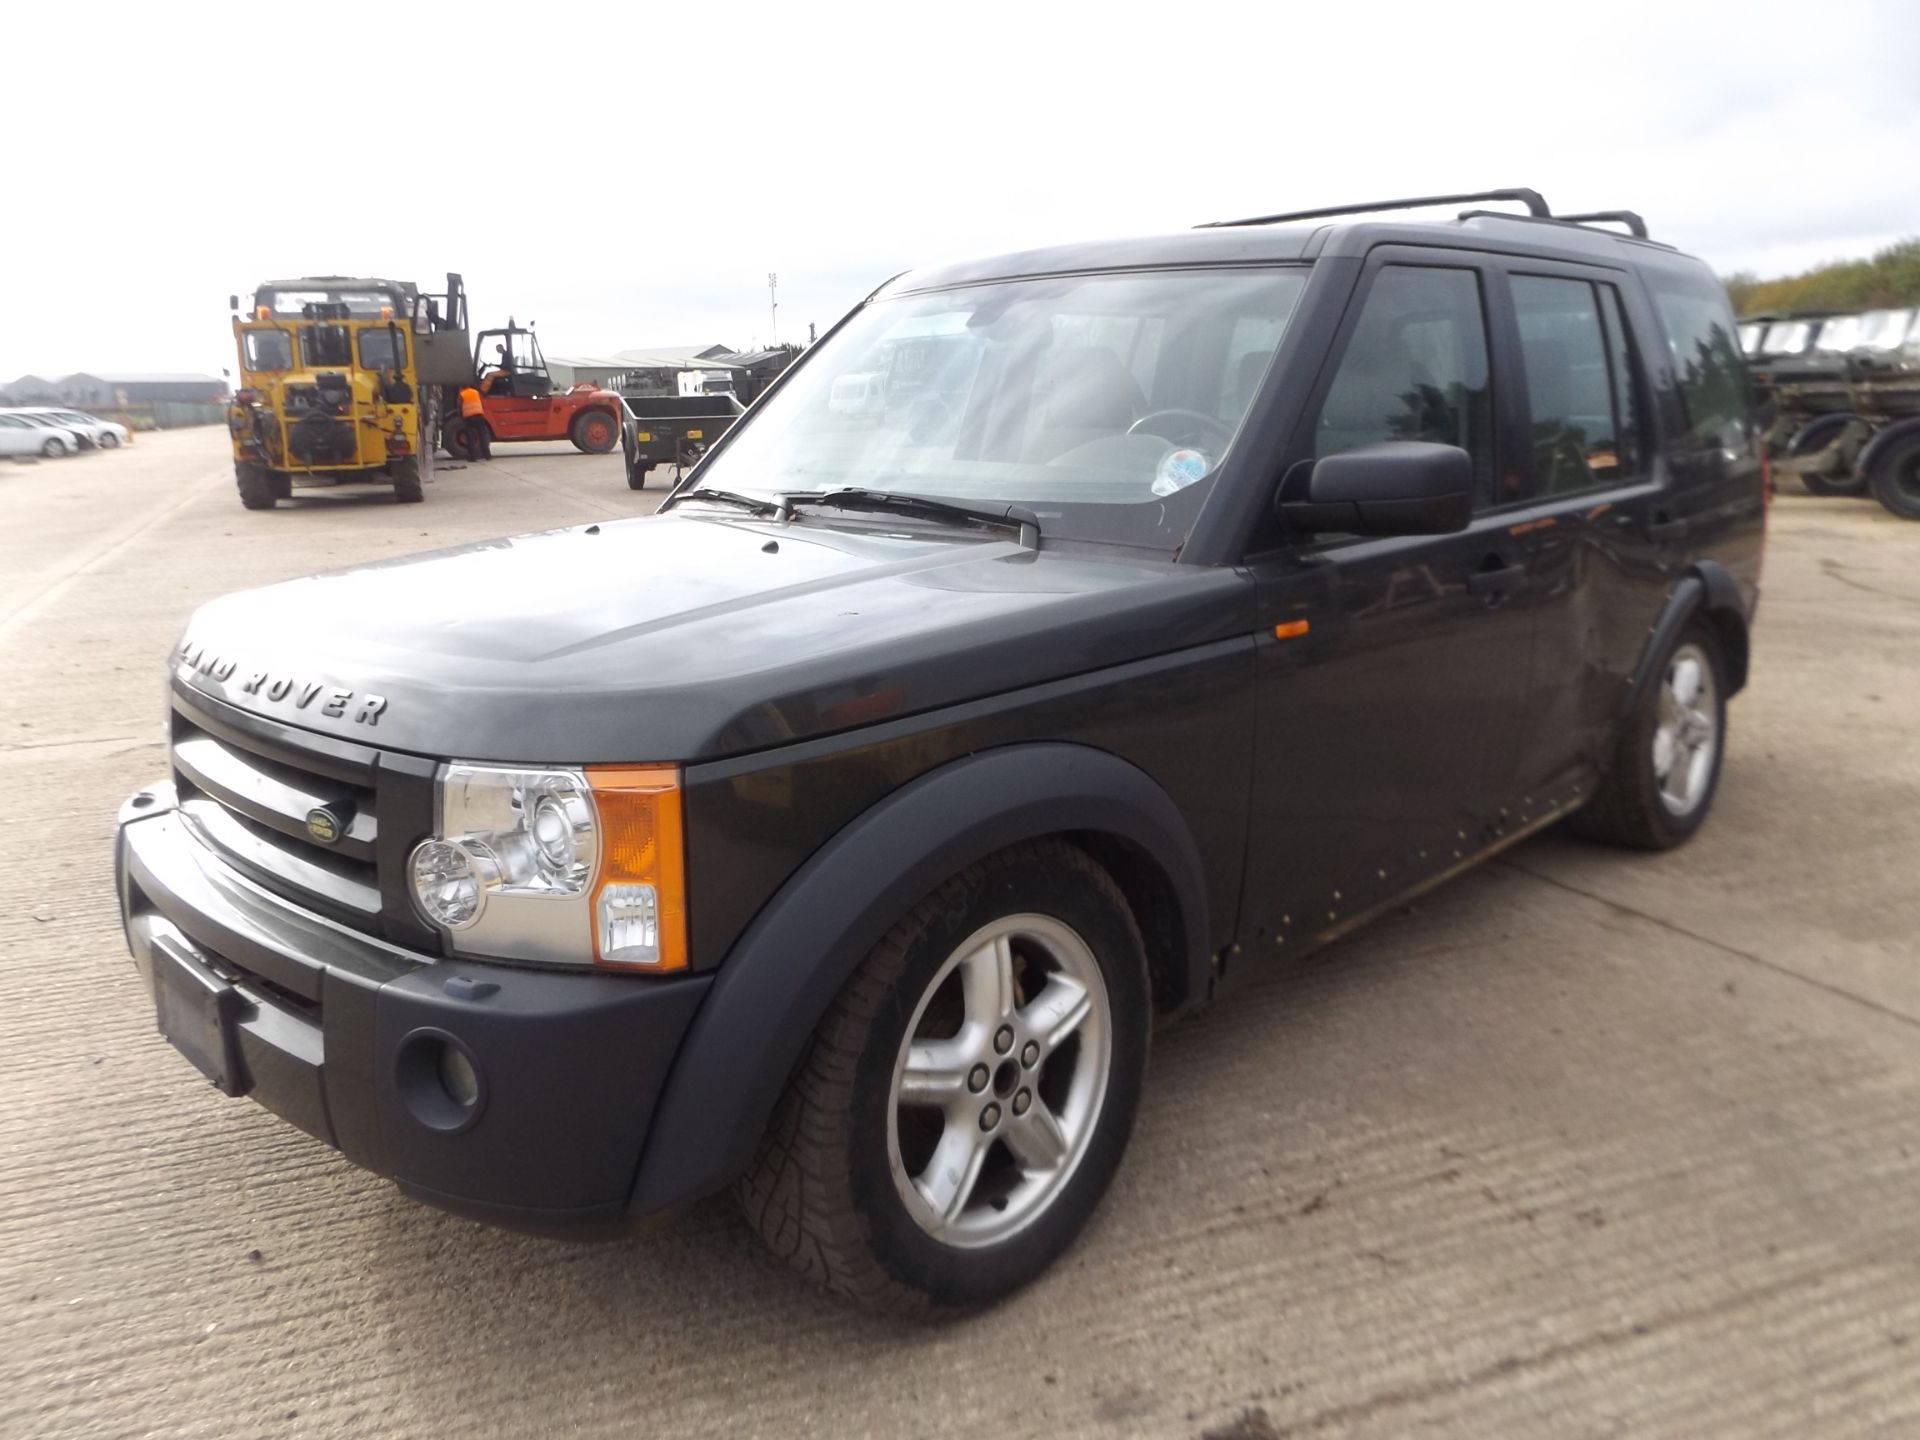 LHD Land Rover Discovery 3 V8 SE Middle East Spec - Image 3 of 17